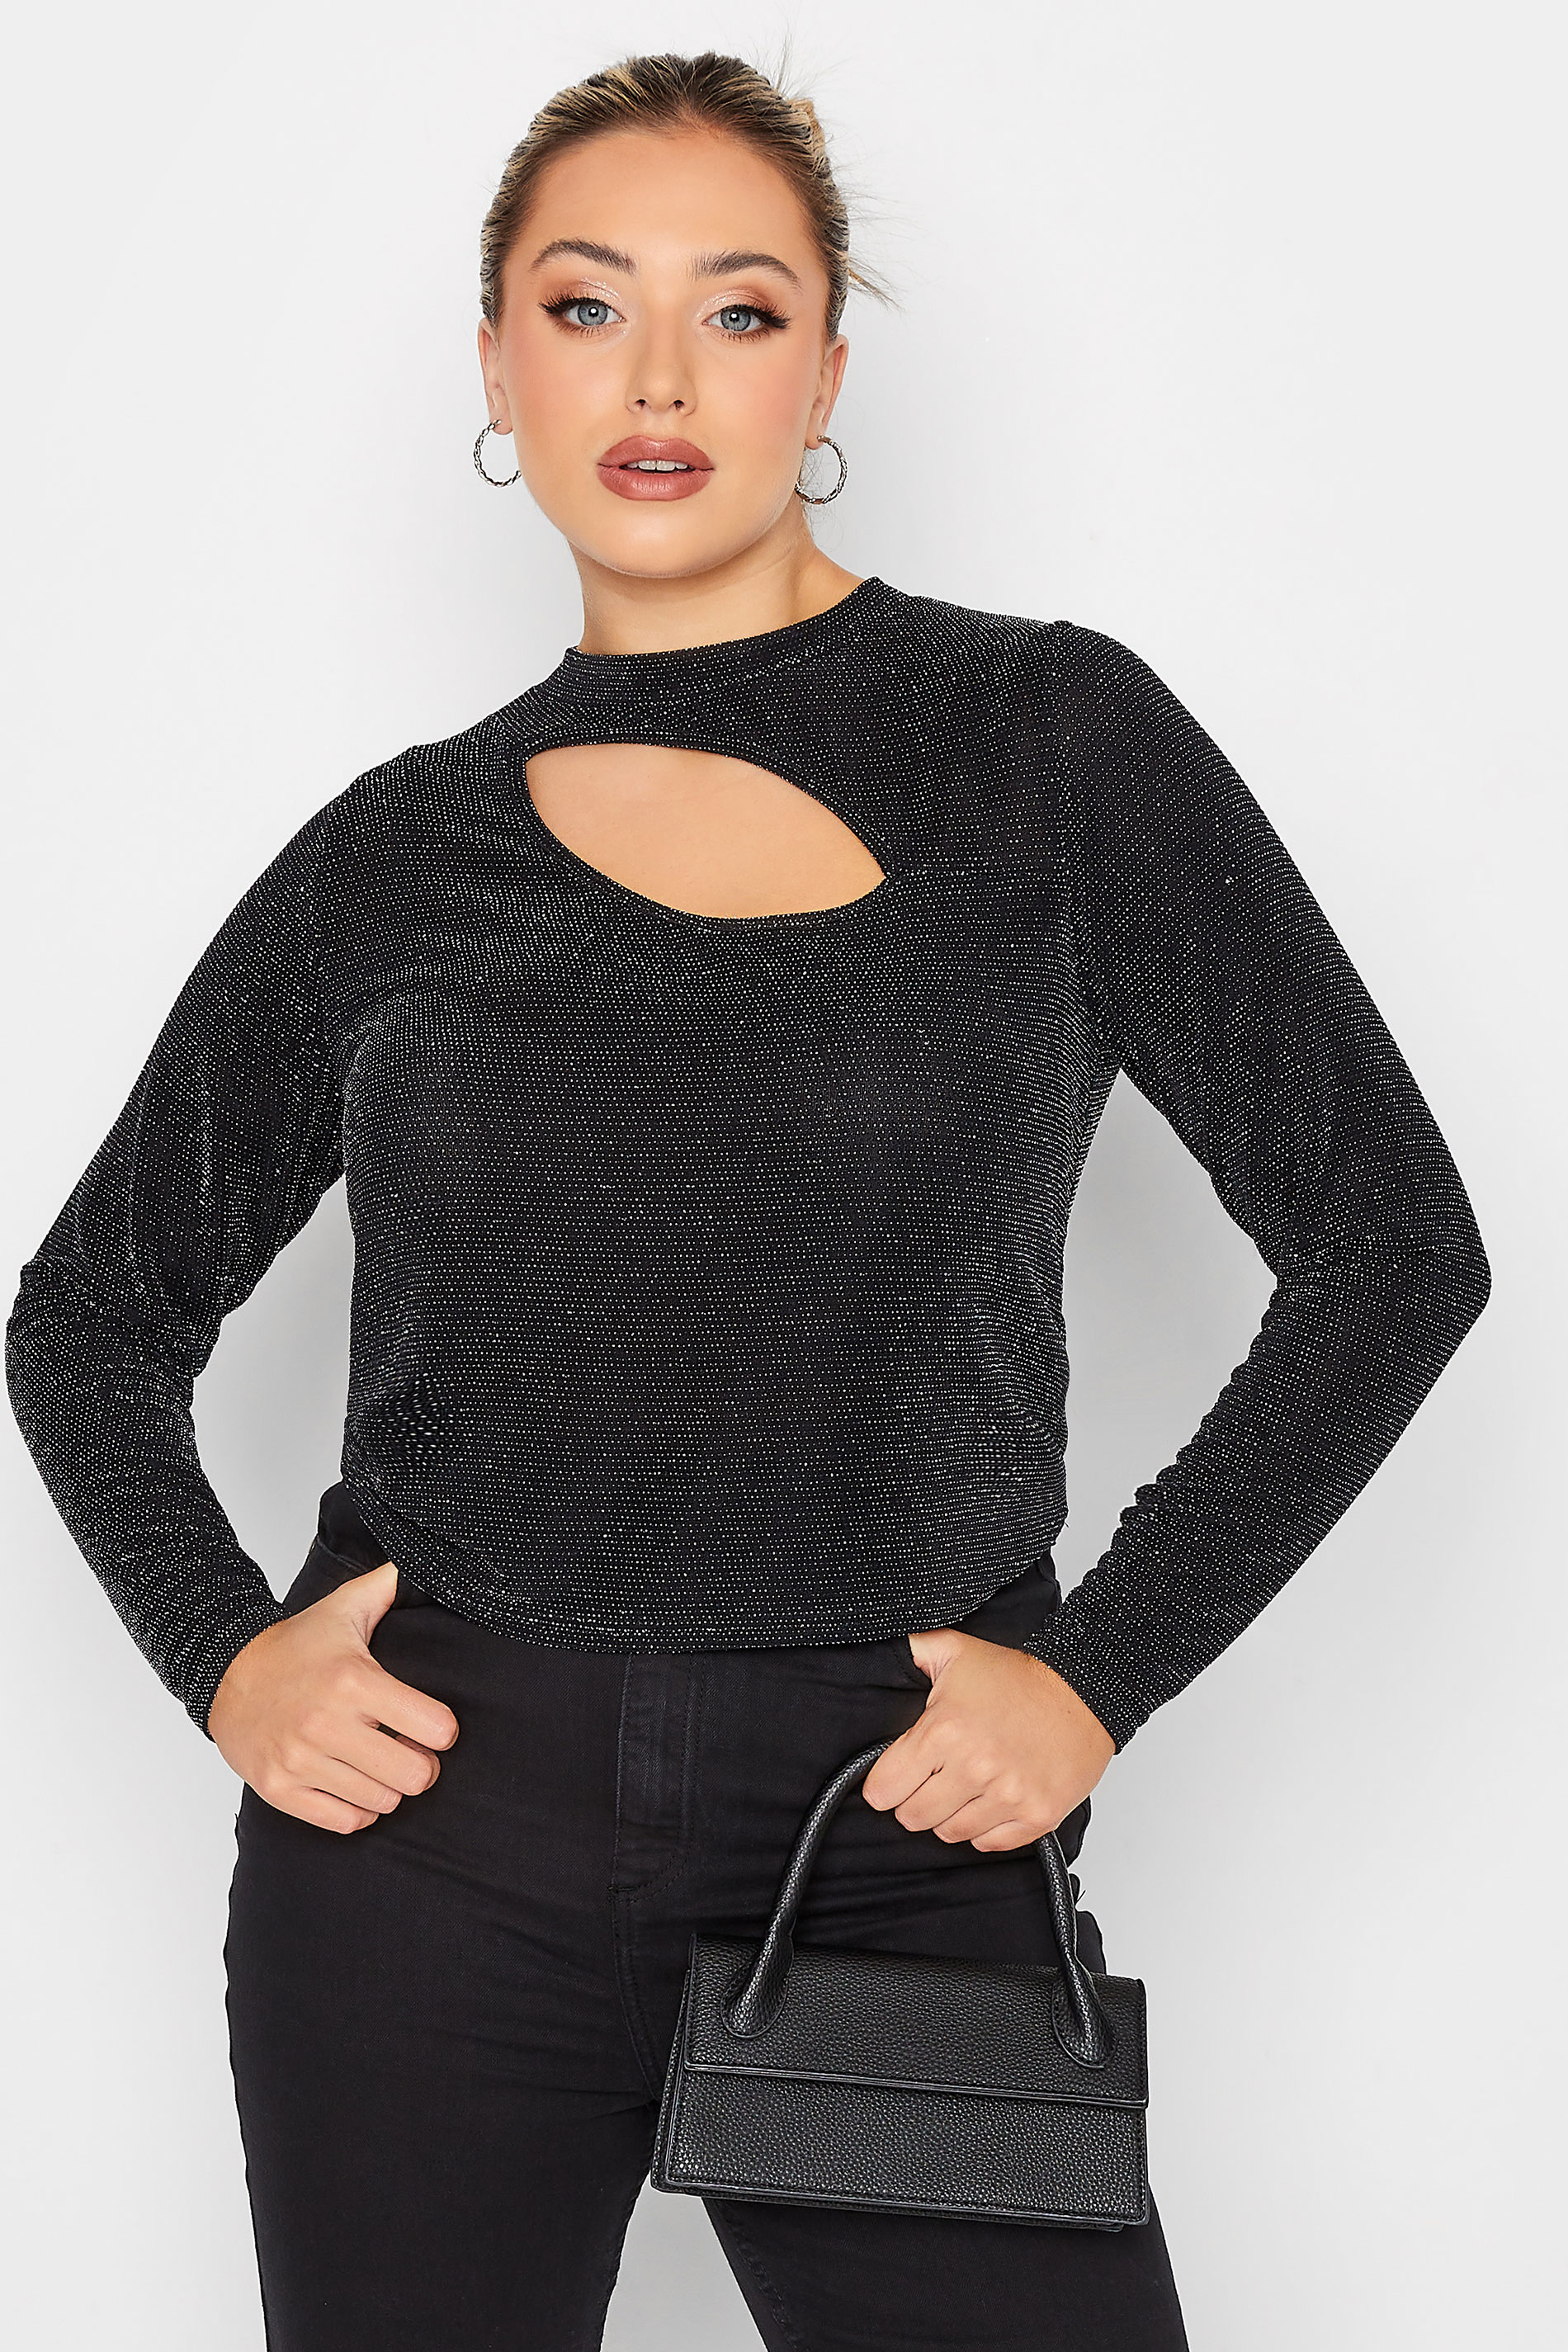 LIMITED COLLECTION Plus Size Black Glitter Cut Out Crop Top | Yours Clothing 1